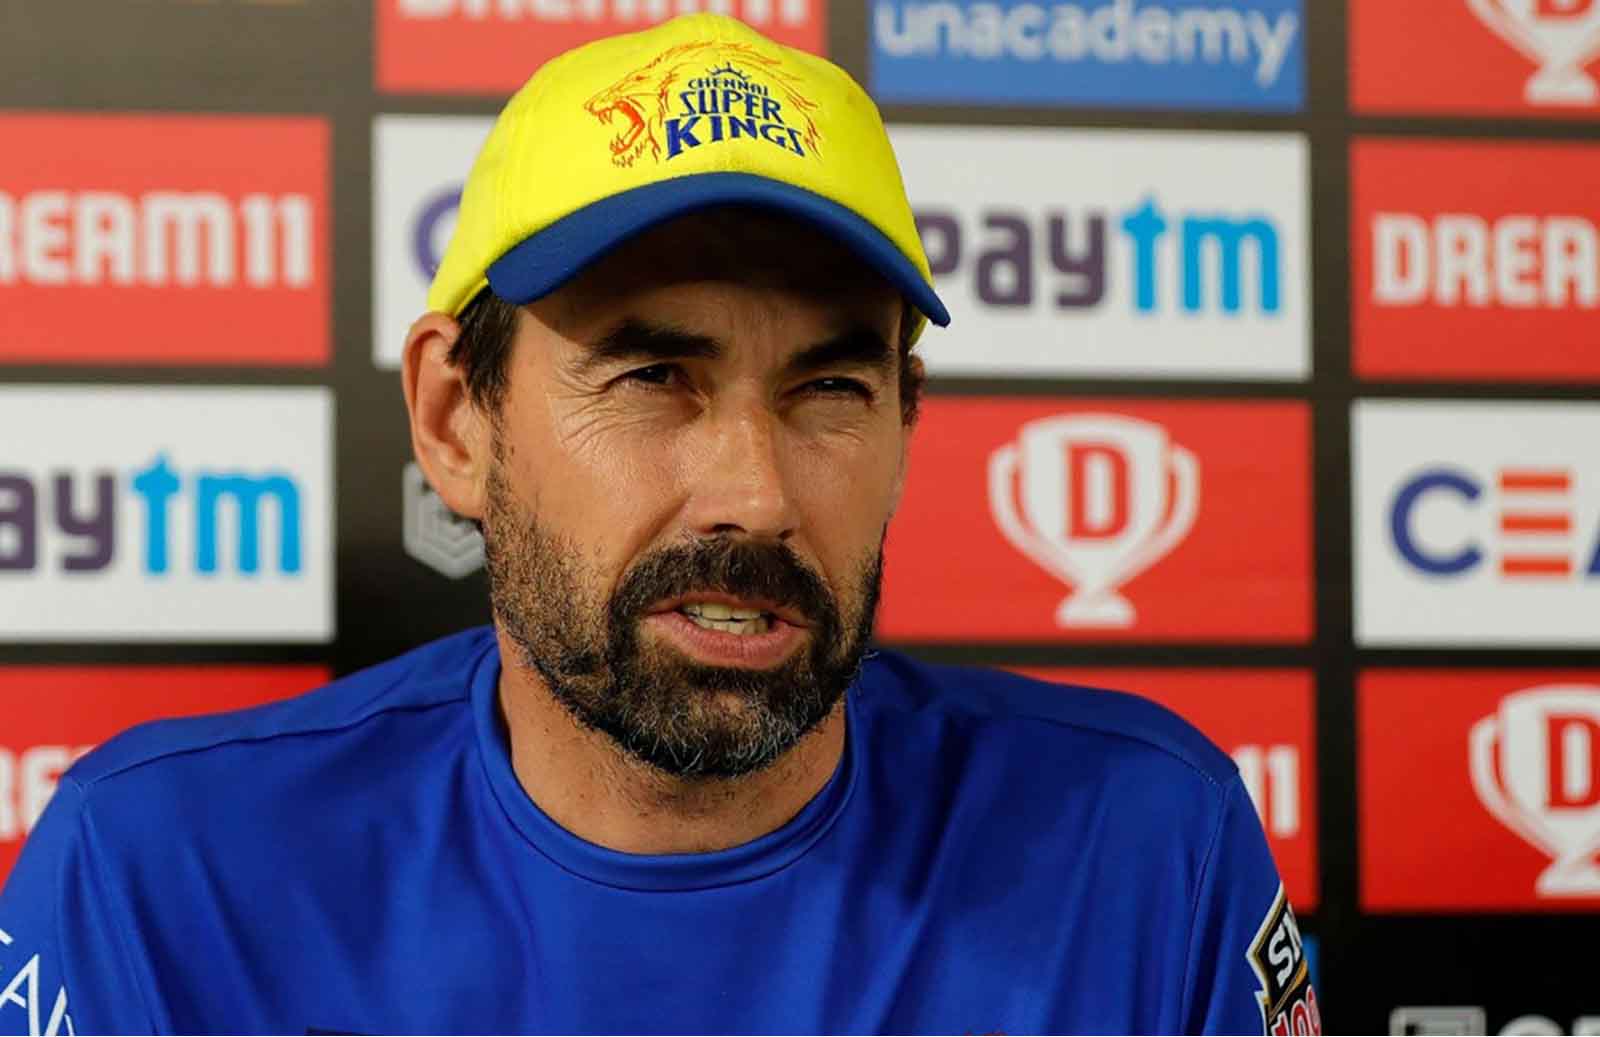 "May be MS Dhoni should’ve batted at 1,"- Stephen Fleming jokes after CSK thrashes KXIP by 10 wickets